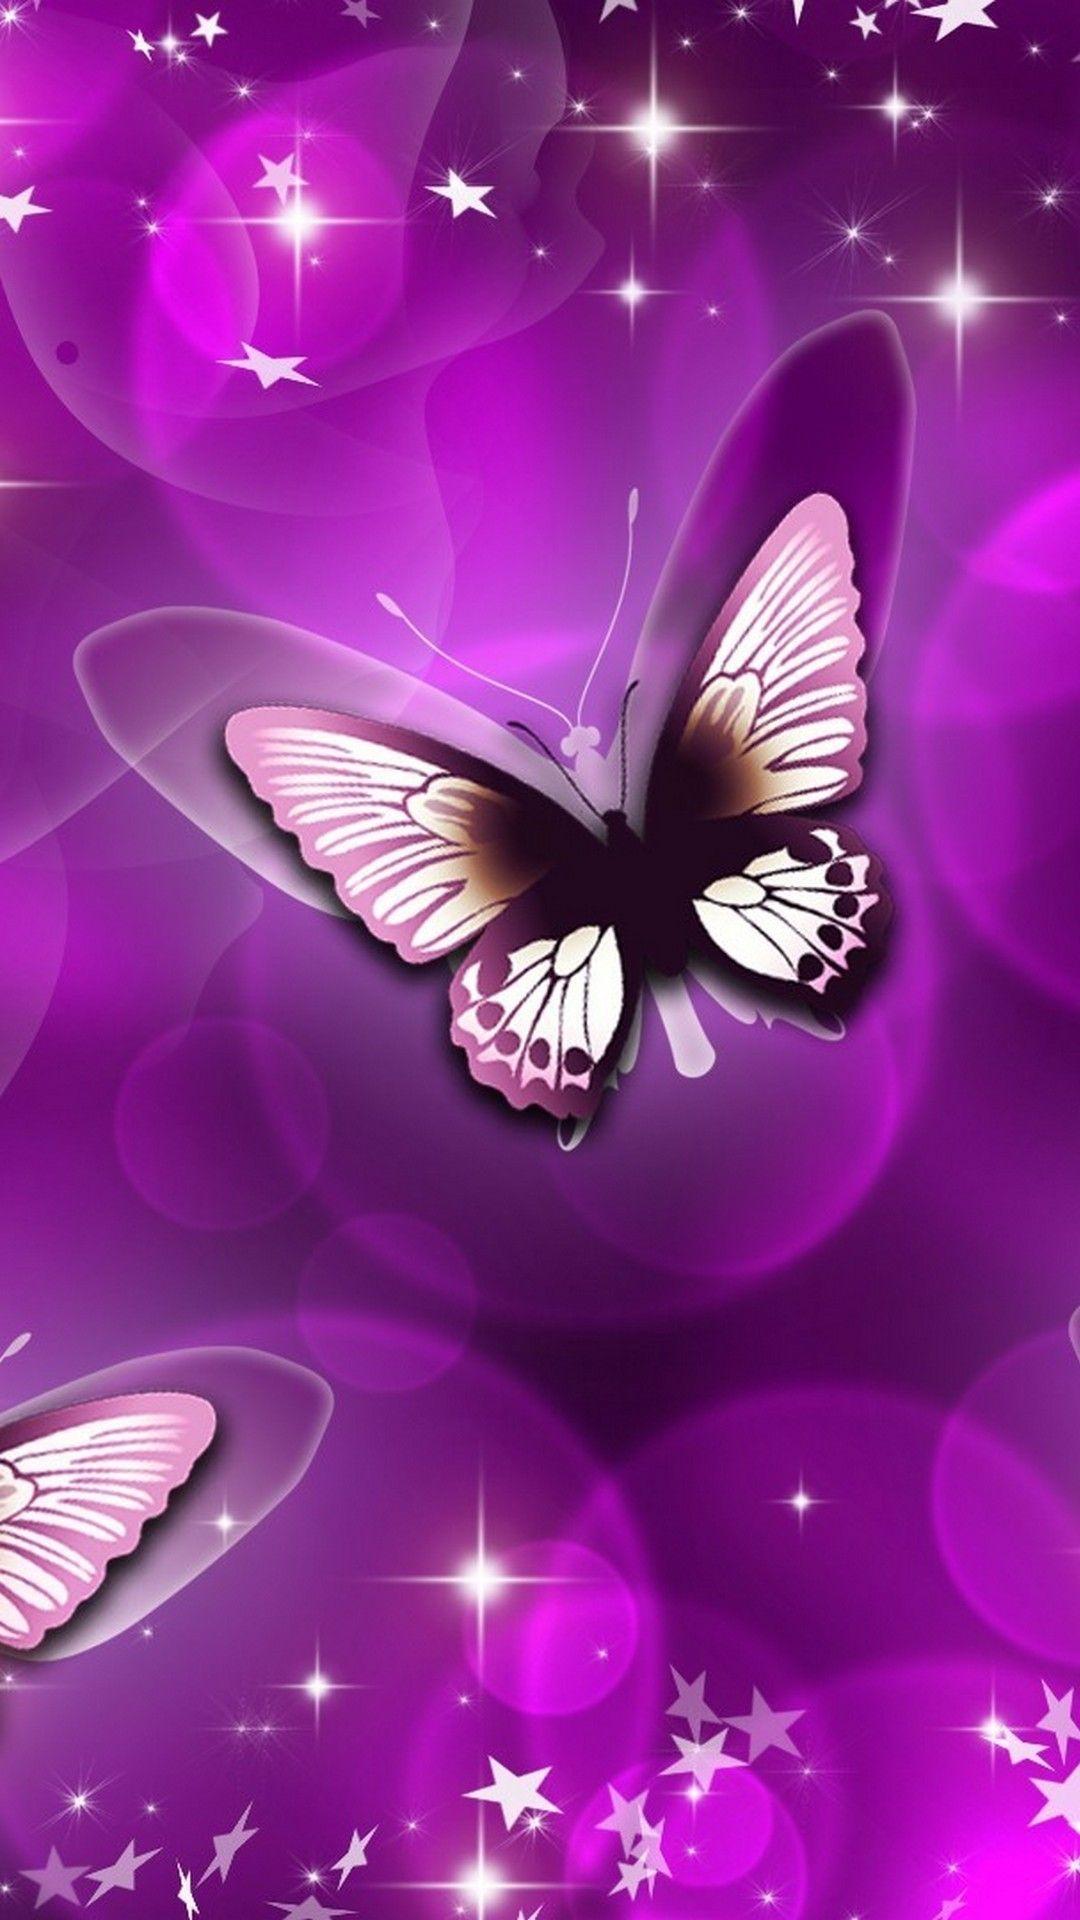 45600 Purple Butterfly Stock Photos Pictures  RoyaltyFree Images   iStock  Purple butterfly white background Purple butterfly background  Red spotted purple butterfly